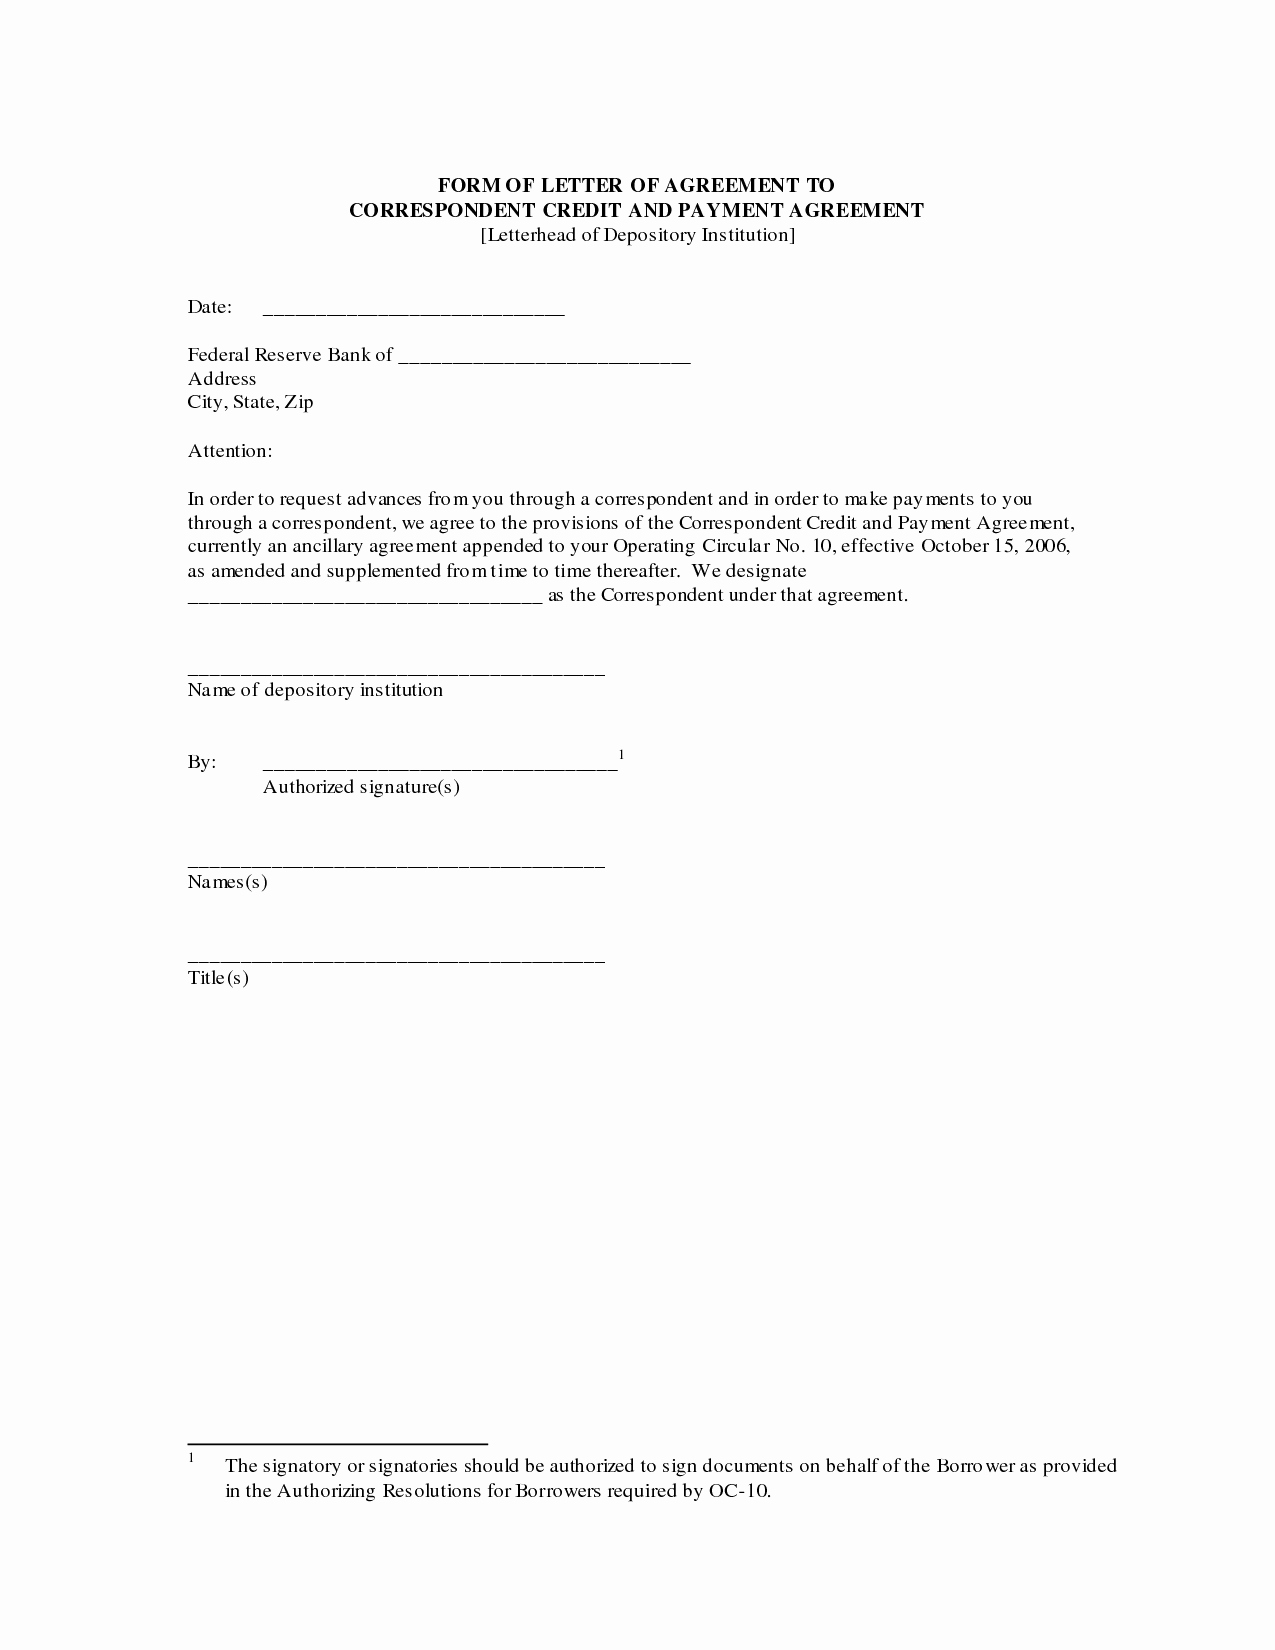 Pay Off Letter Sample Fresh Agreement Letter Free Printable Documents